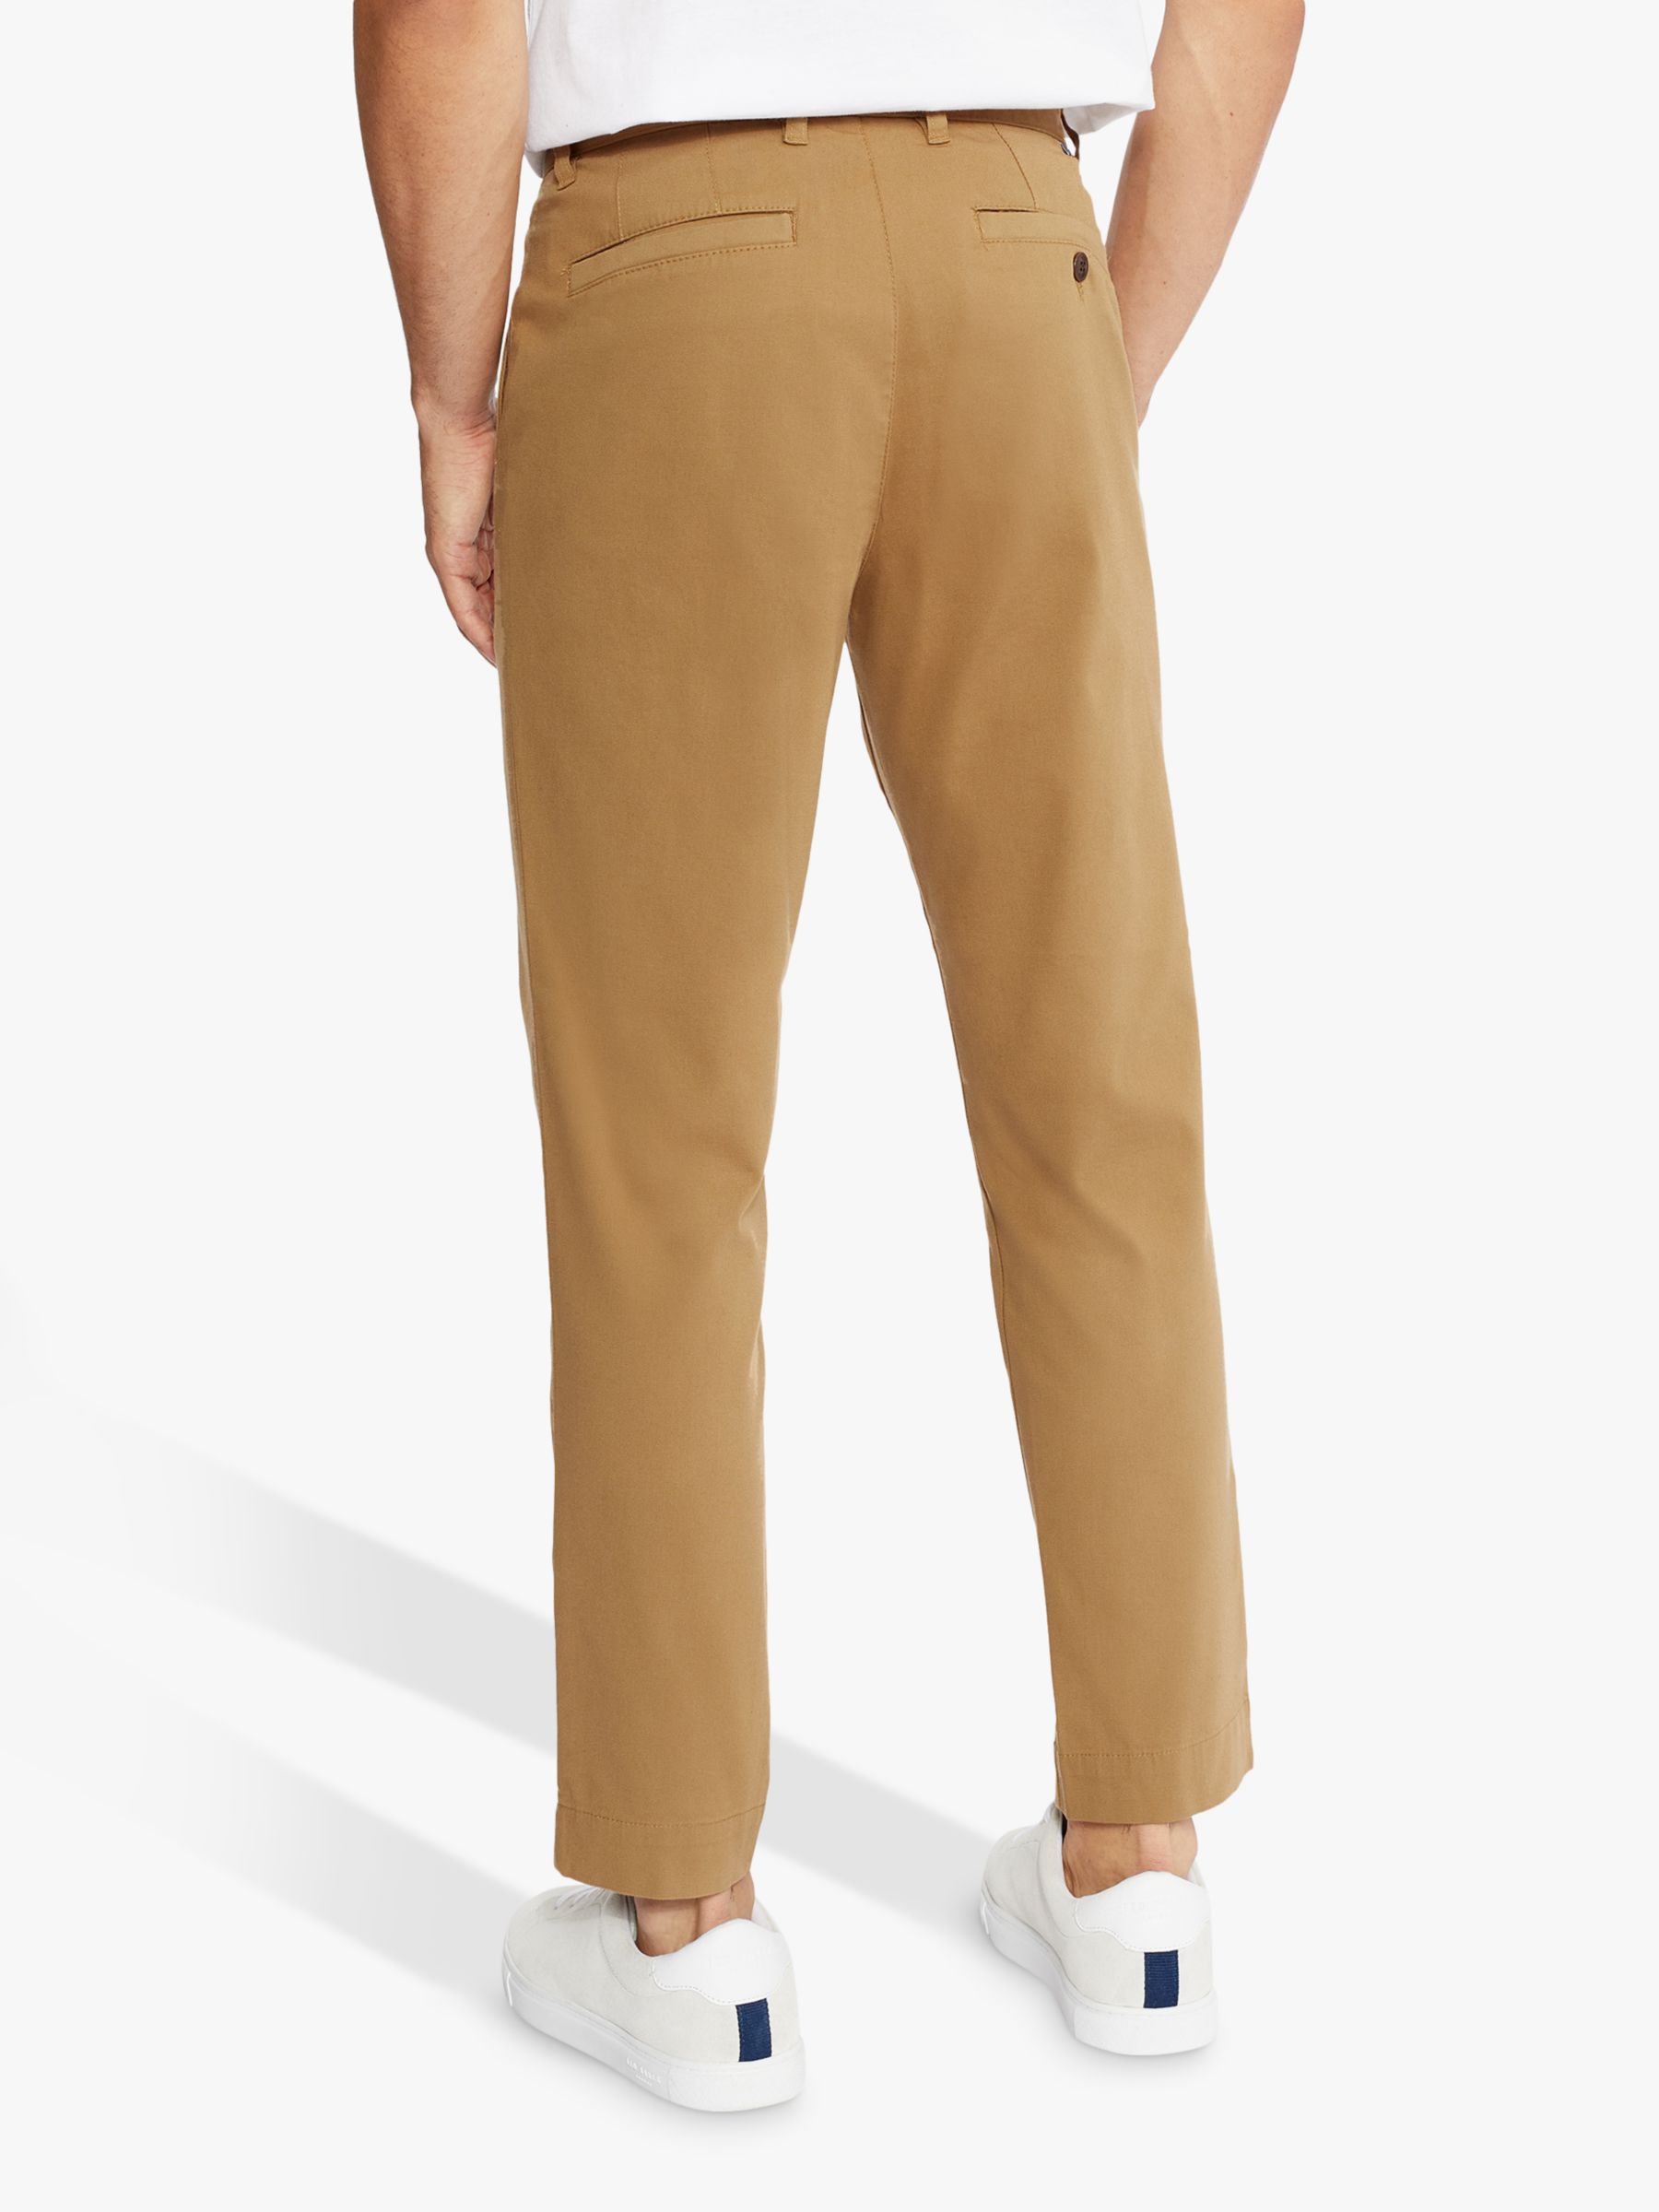 Ted Baker Genbee Cotton Lyocell Chinos, Natural, 34S